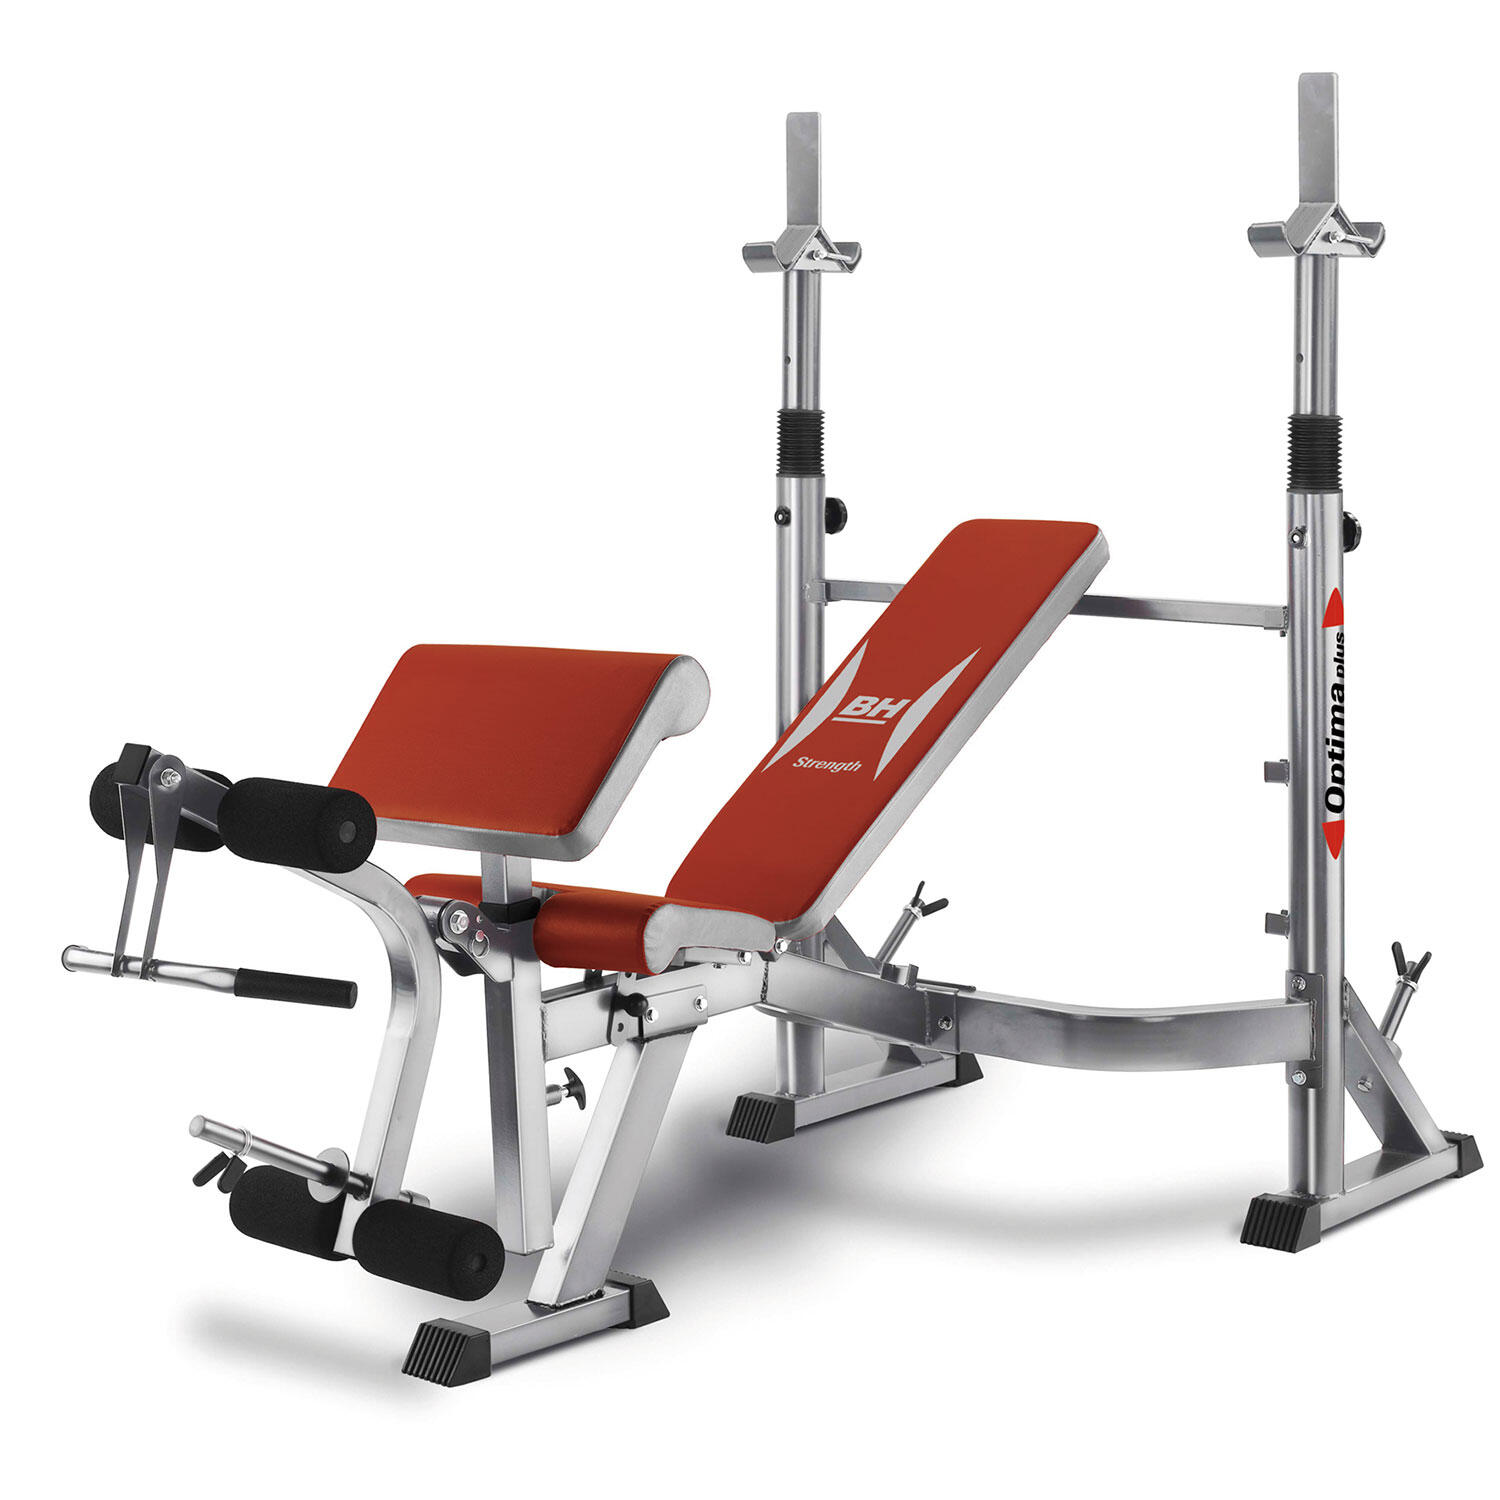 BH FITNESS OPTIMA PRESS G330 WEIGHT BENCH WITH REAR SQUAT RACK 1/7